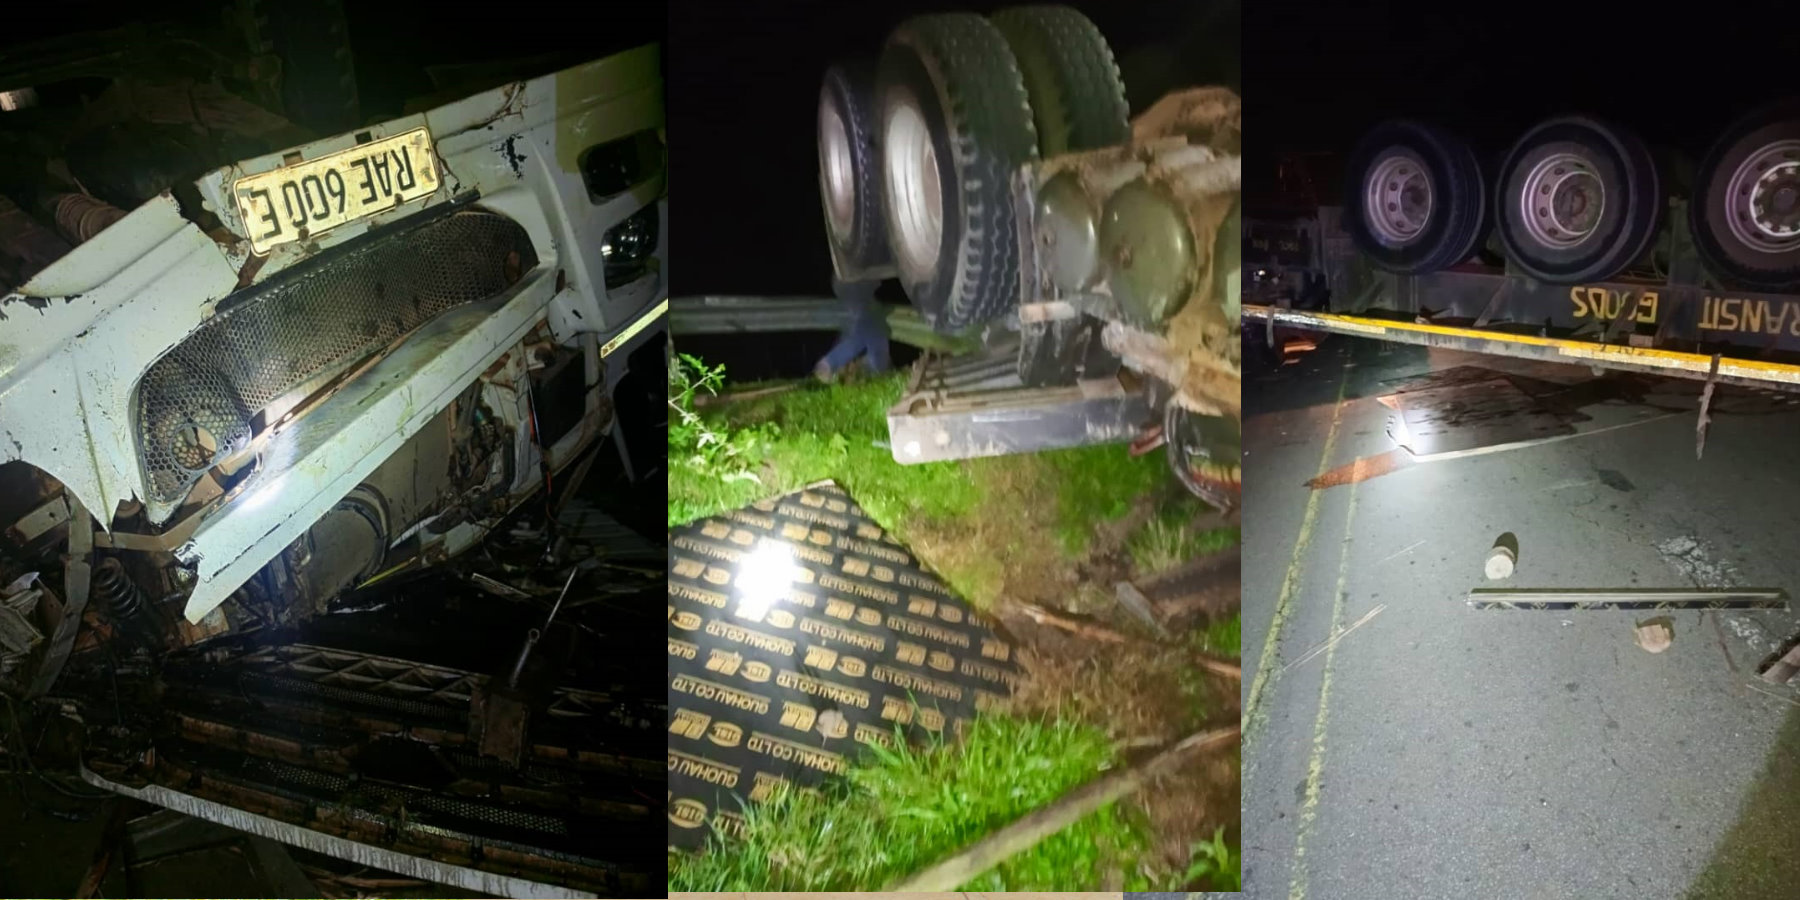 A Rwandan truck loaded with Guohau plywood traveling from Kampala to Kigali-Rwanda veers off from the road killing its Conductor.